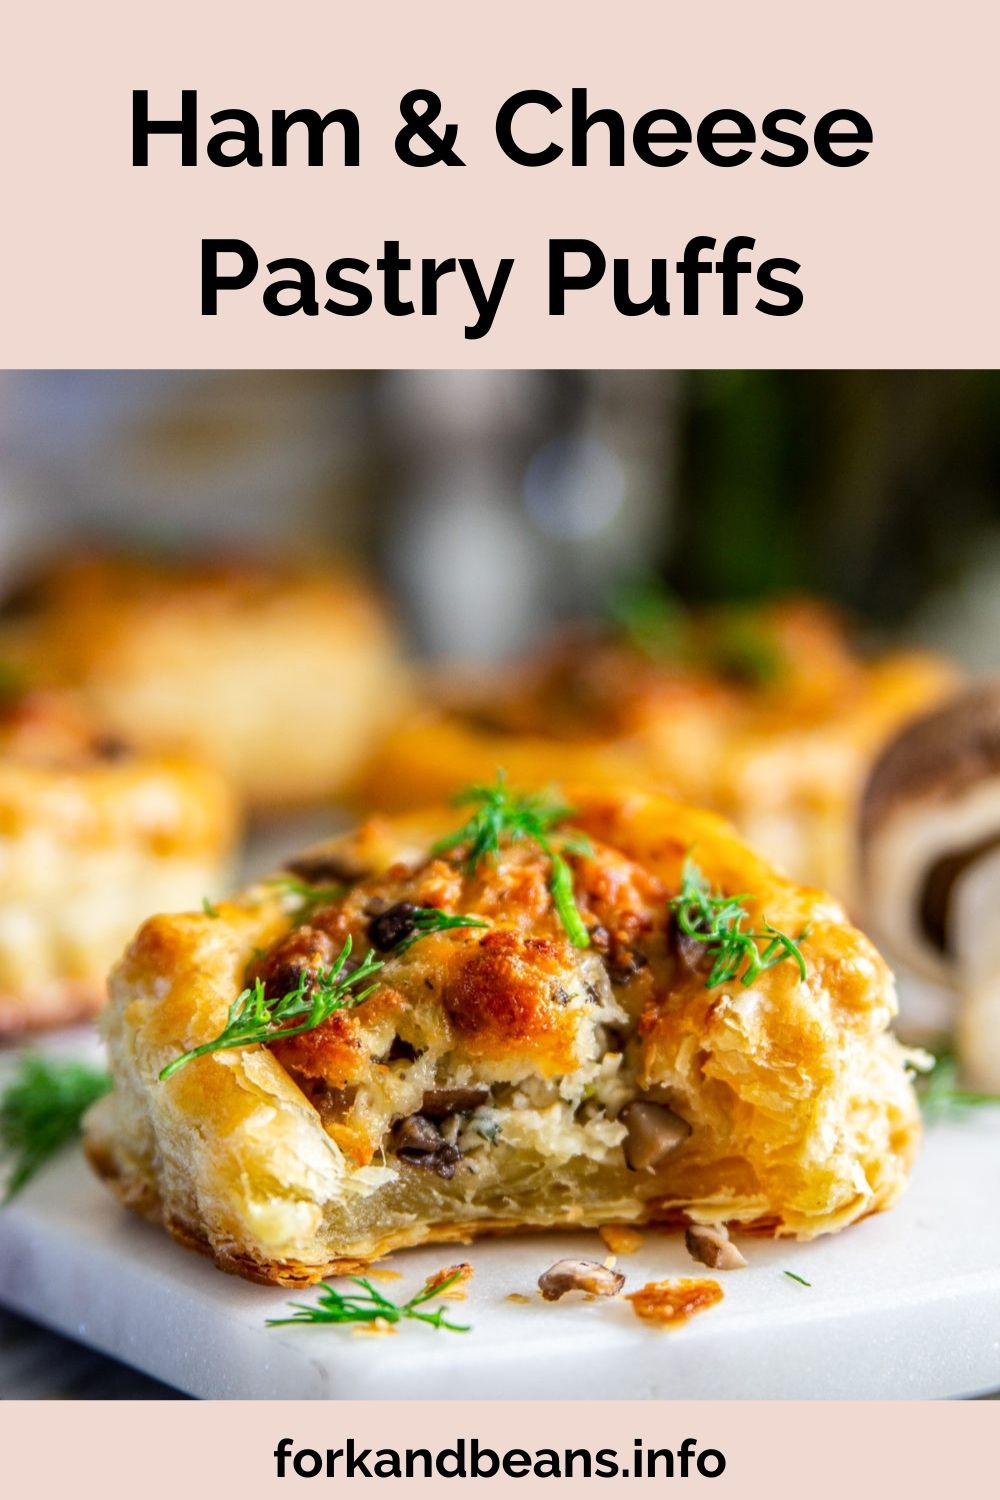 Appetizers: Mushroom Puff Pastry